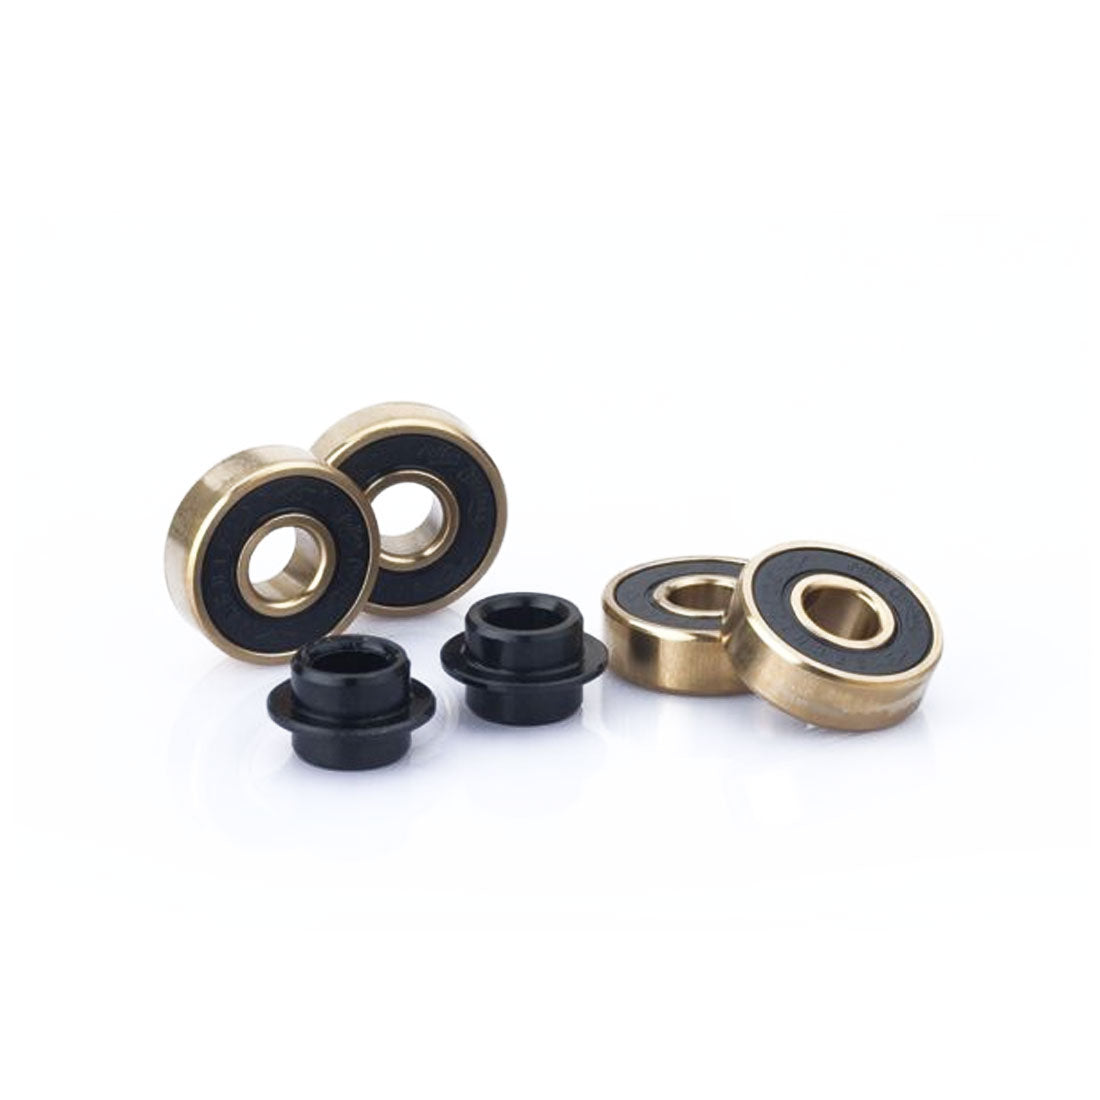 Sacrifice Roller Coasters Abec 9 Bearings - Gold/Black Scooter Hardware and Parts